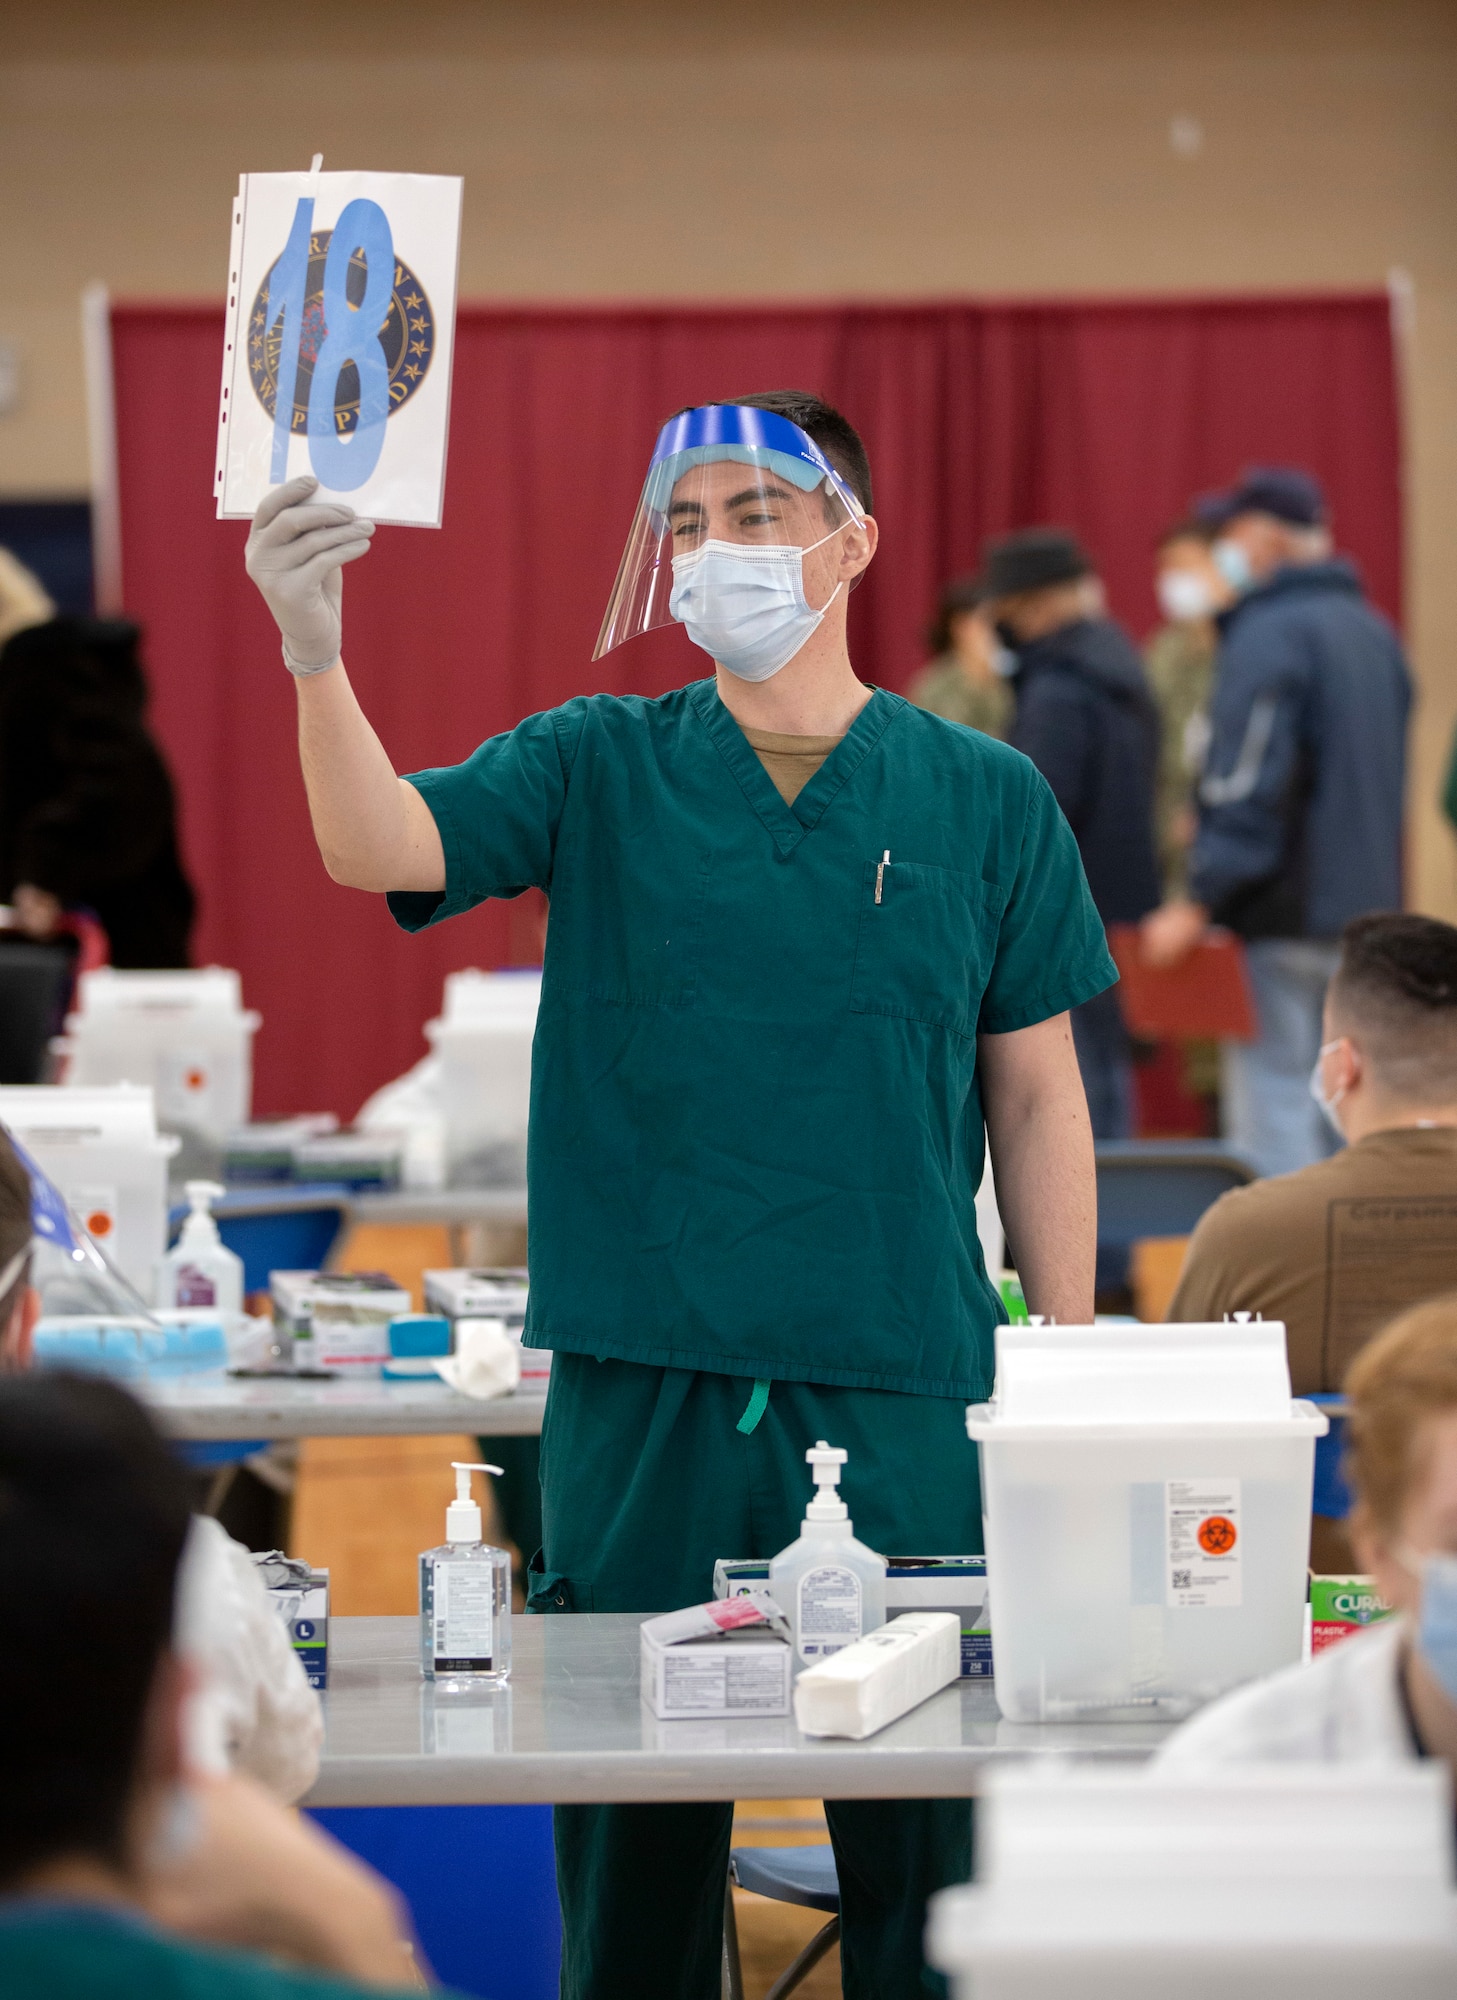 Hospital Corpsman 3rd Class Charles Cambern holds up a numbered sign as patients circle through to receive the COVID-19 vaccine as part of Operation Warp Speed at Walter Reed National Military Medical Center.